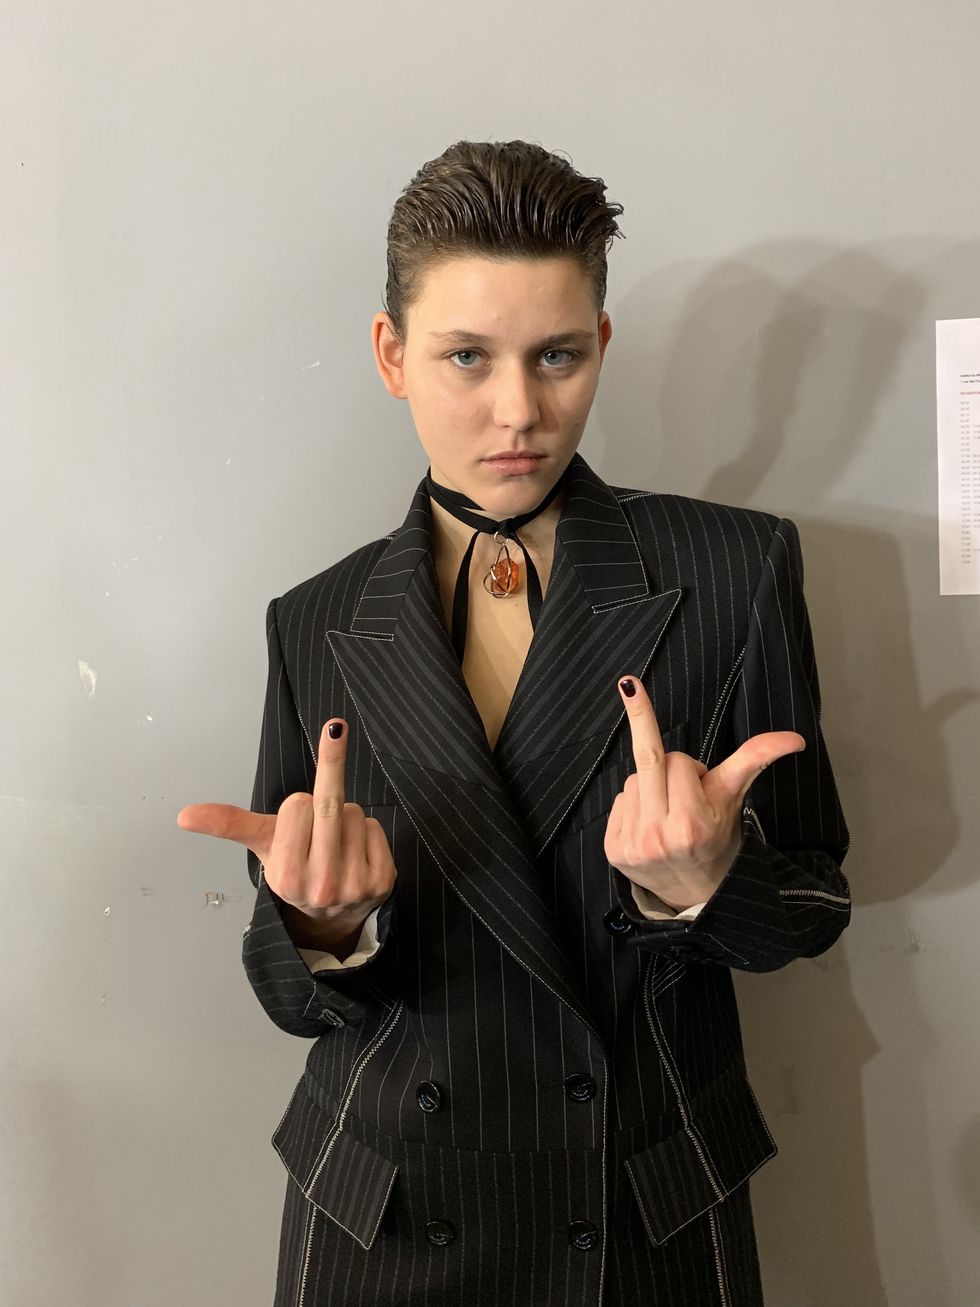 Suit, Hairstyle, Forehead, Finger, Fashion, Formal wear, Cool, Tuxedo, Gesture, Model, 